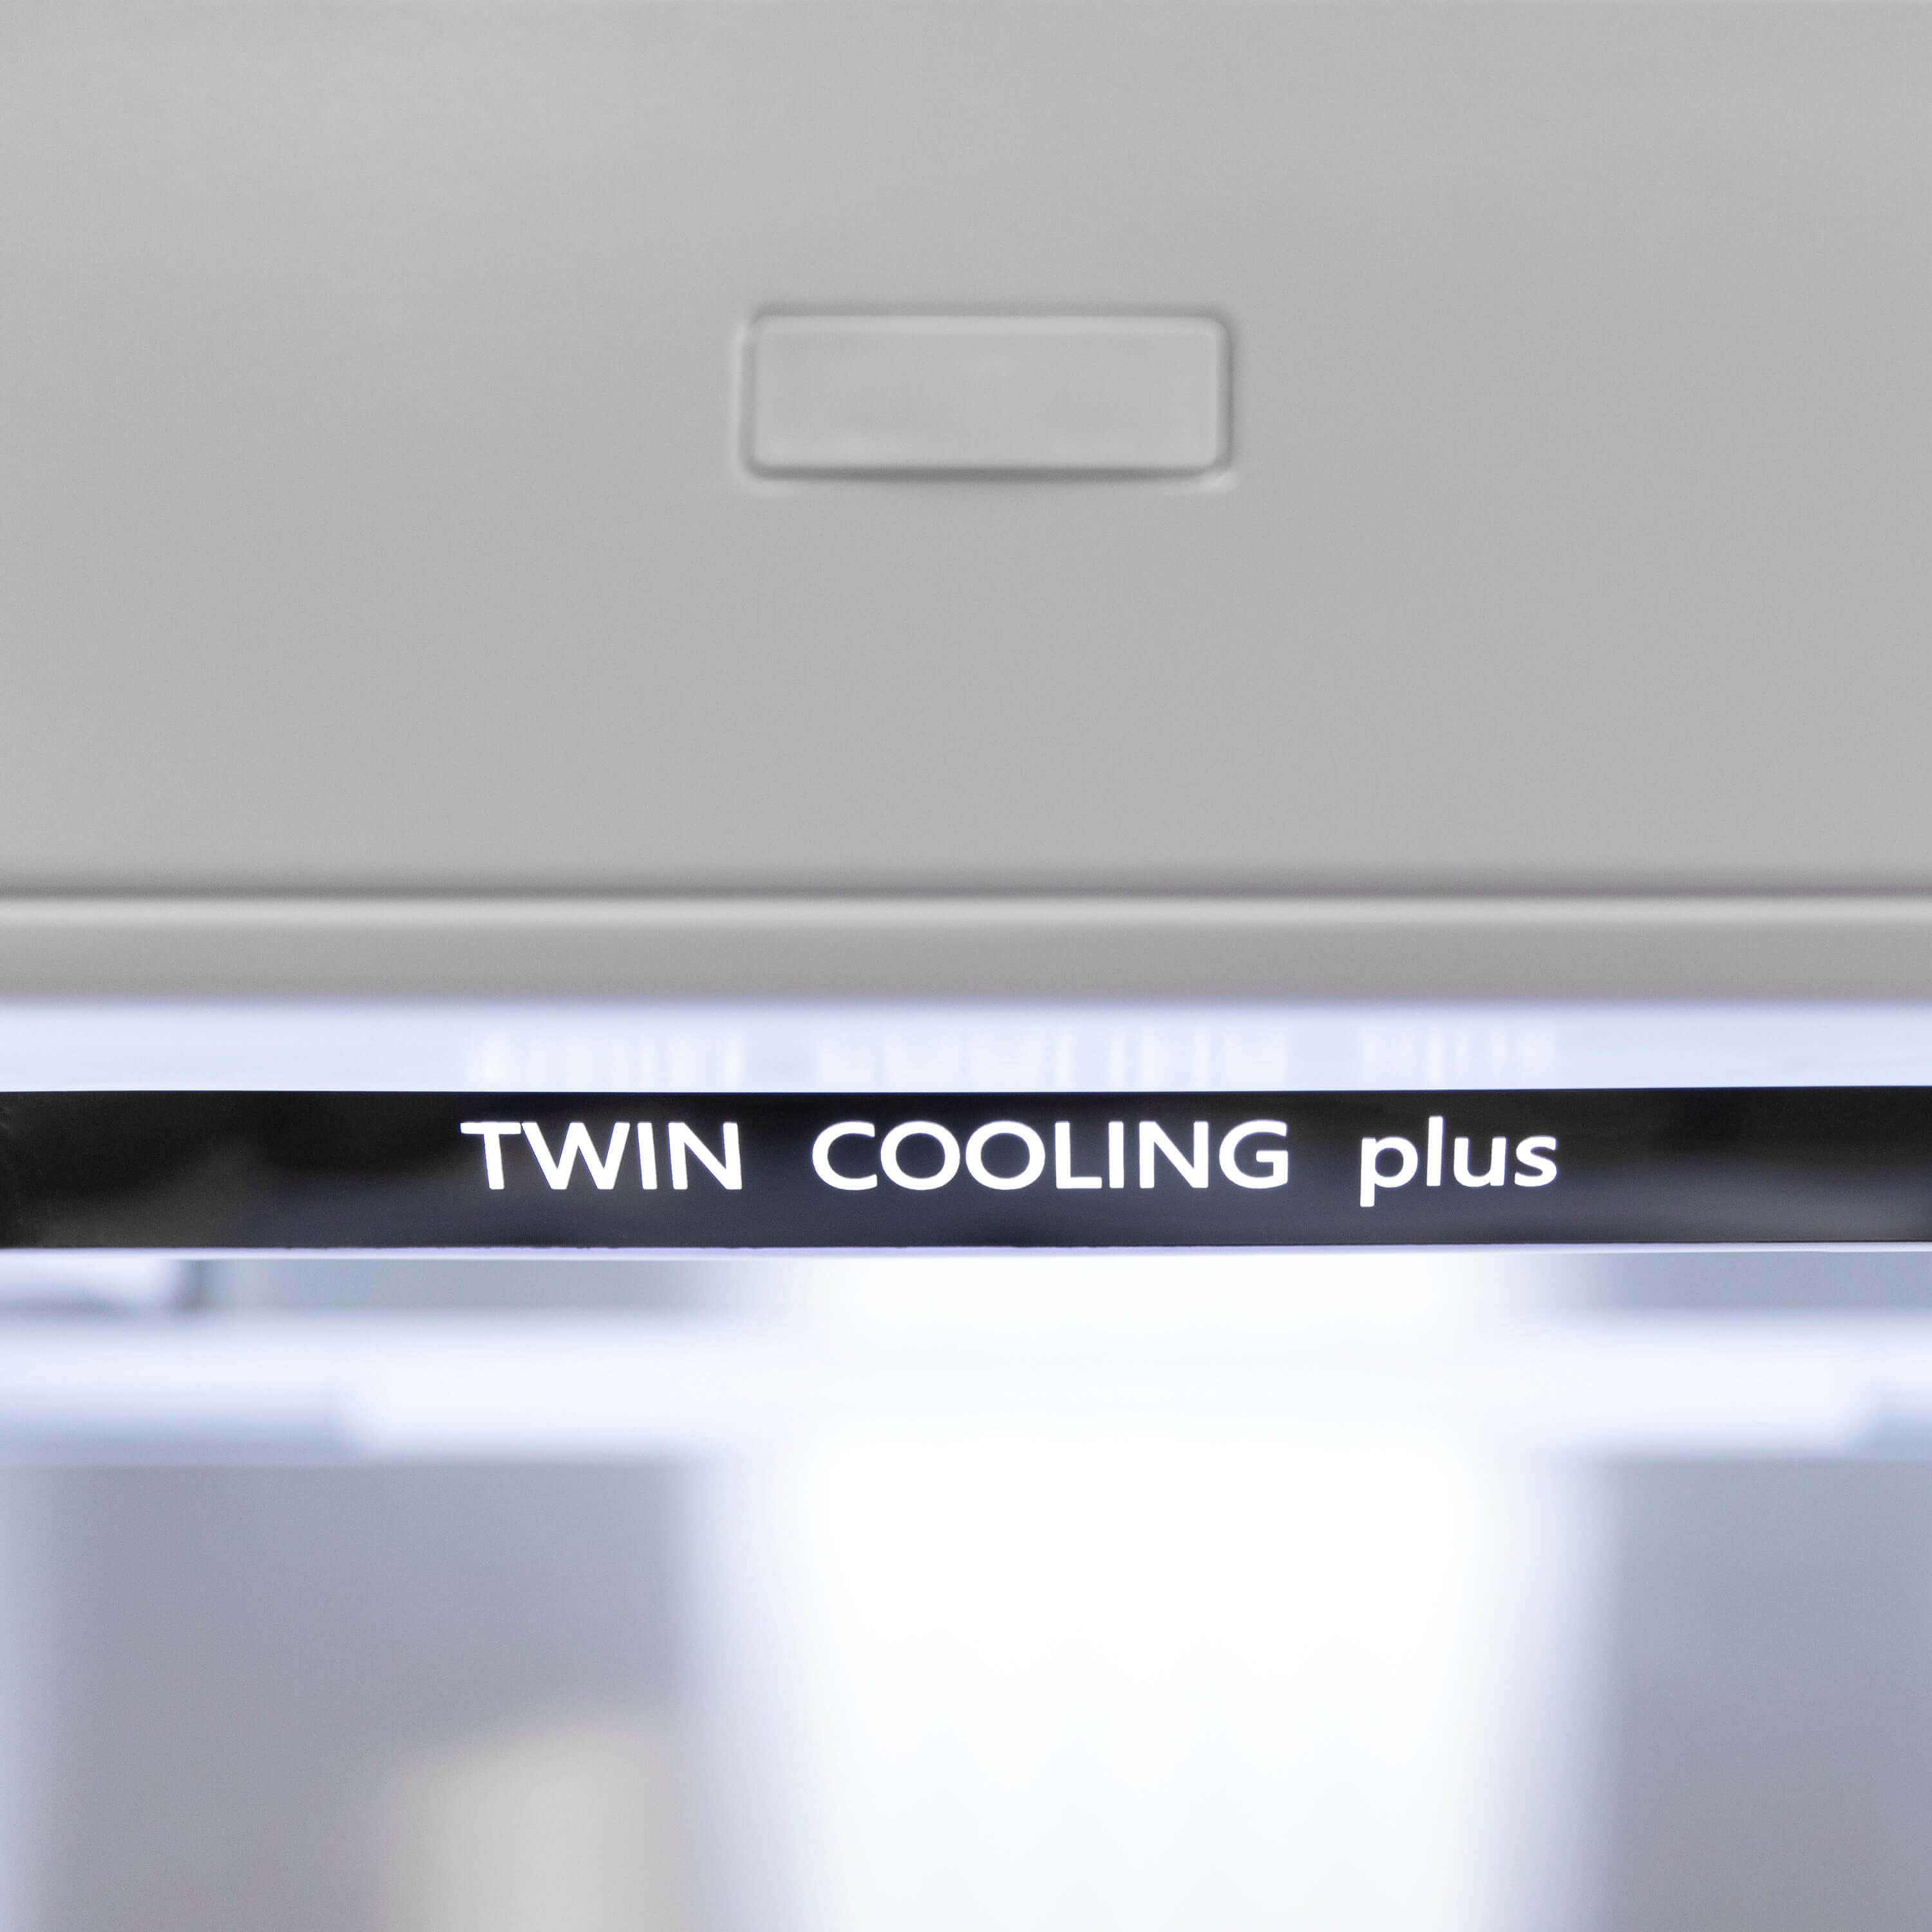 Twin Cooling Plus - Separate refrigerator and freezer cooling systems ensures air and odors are not mixed between compartments and provide fast and efficient cooling